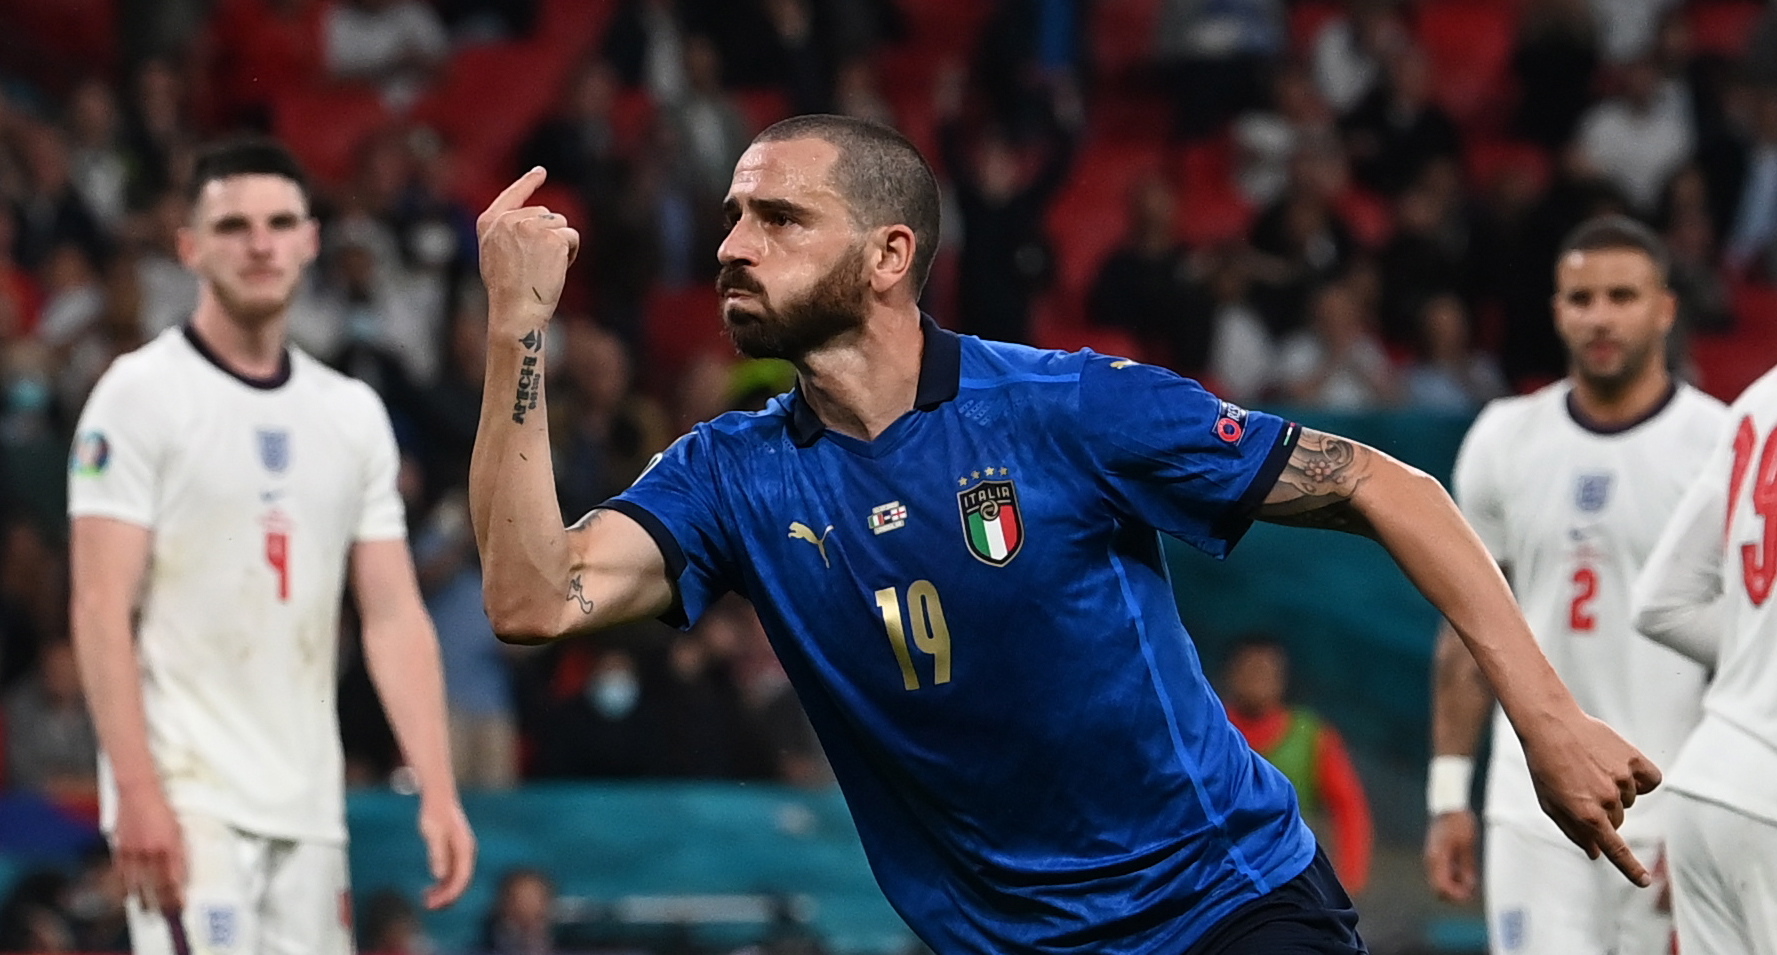 epa09338575 Leonardo Bonucci of Italy celebrates scoring the equalizer during the UEFA EURO 2020 final between Italy and England in London, Britain, 11 July 2021.  EPA/Paul Ellis / POOL (RESTRICTIONS: For editorial news reporting purposes only. Images must appear as still images and must not emulate match action video footage. Photographs published in online publications shall have an interval of at least 20 seconds between the posting.)